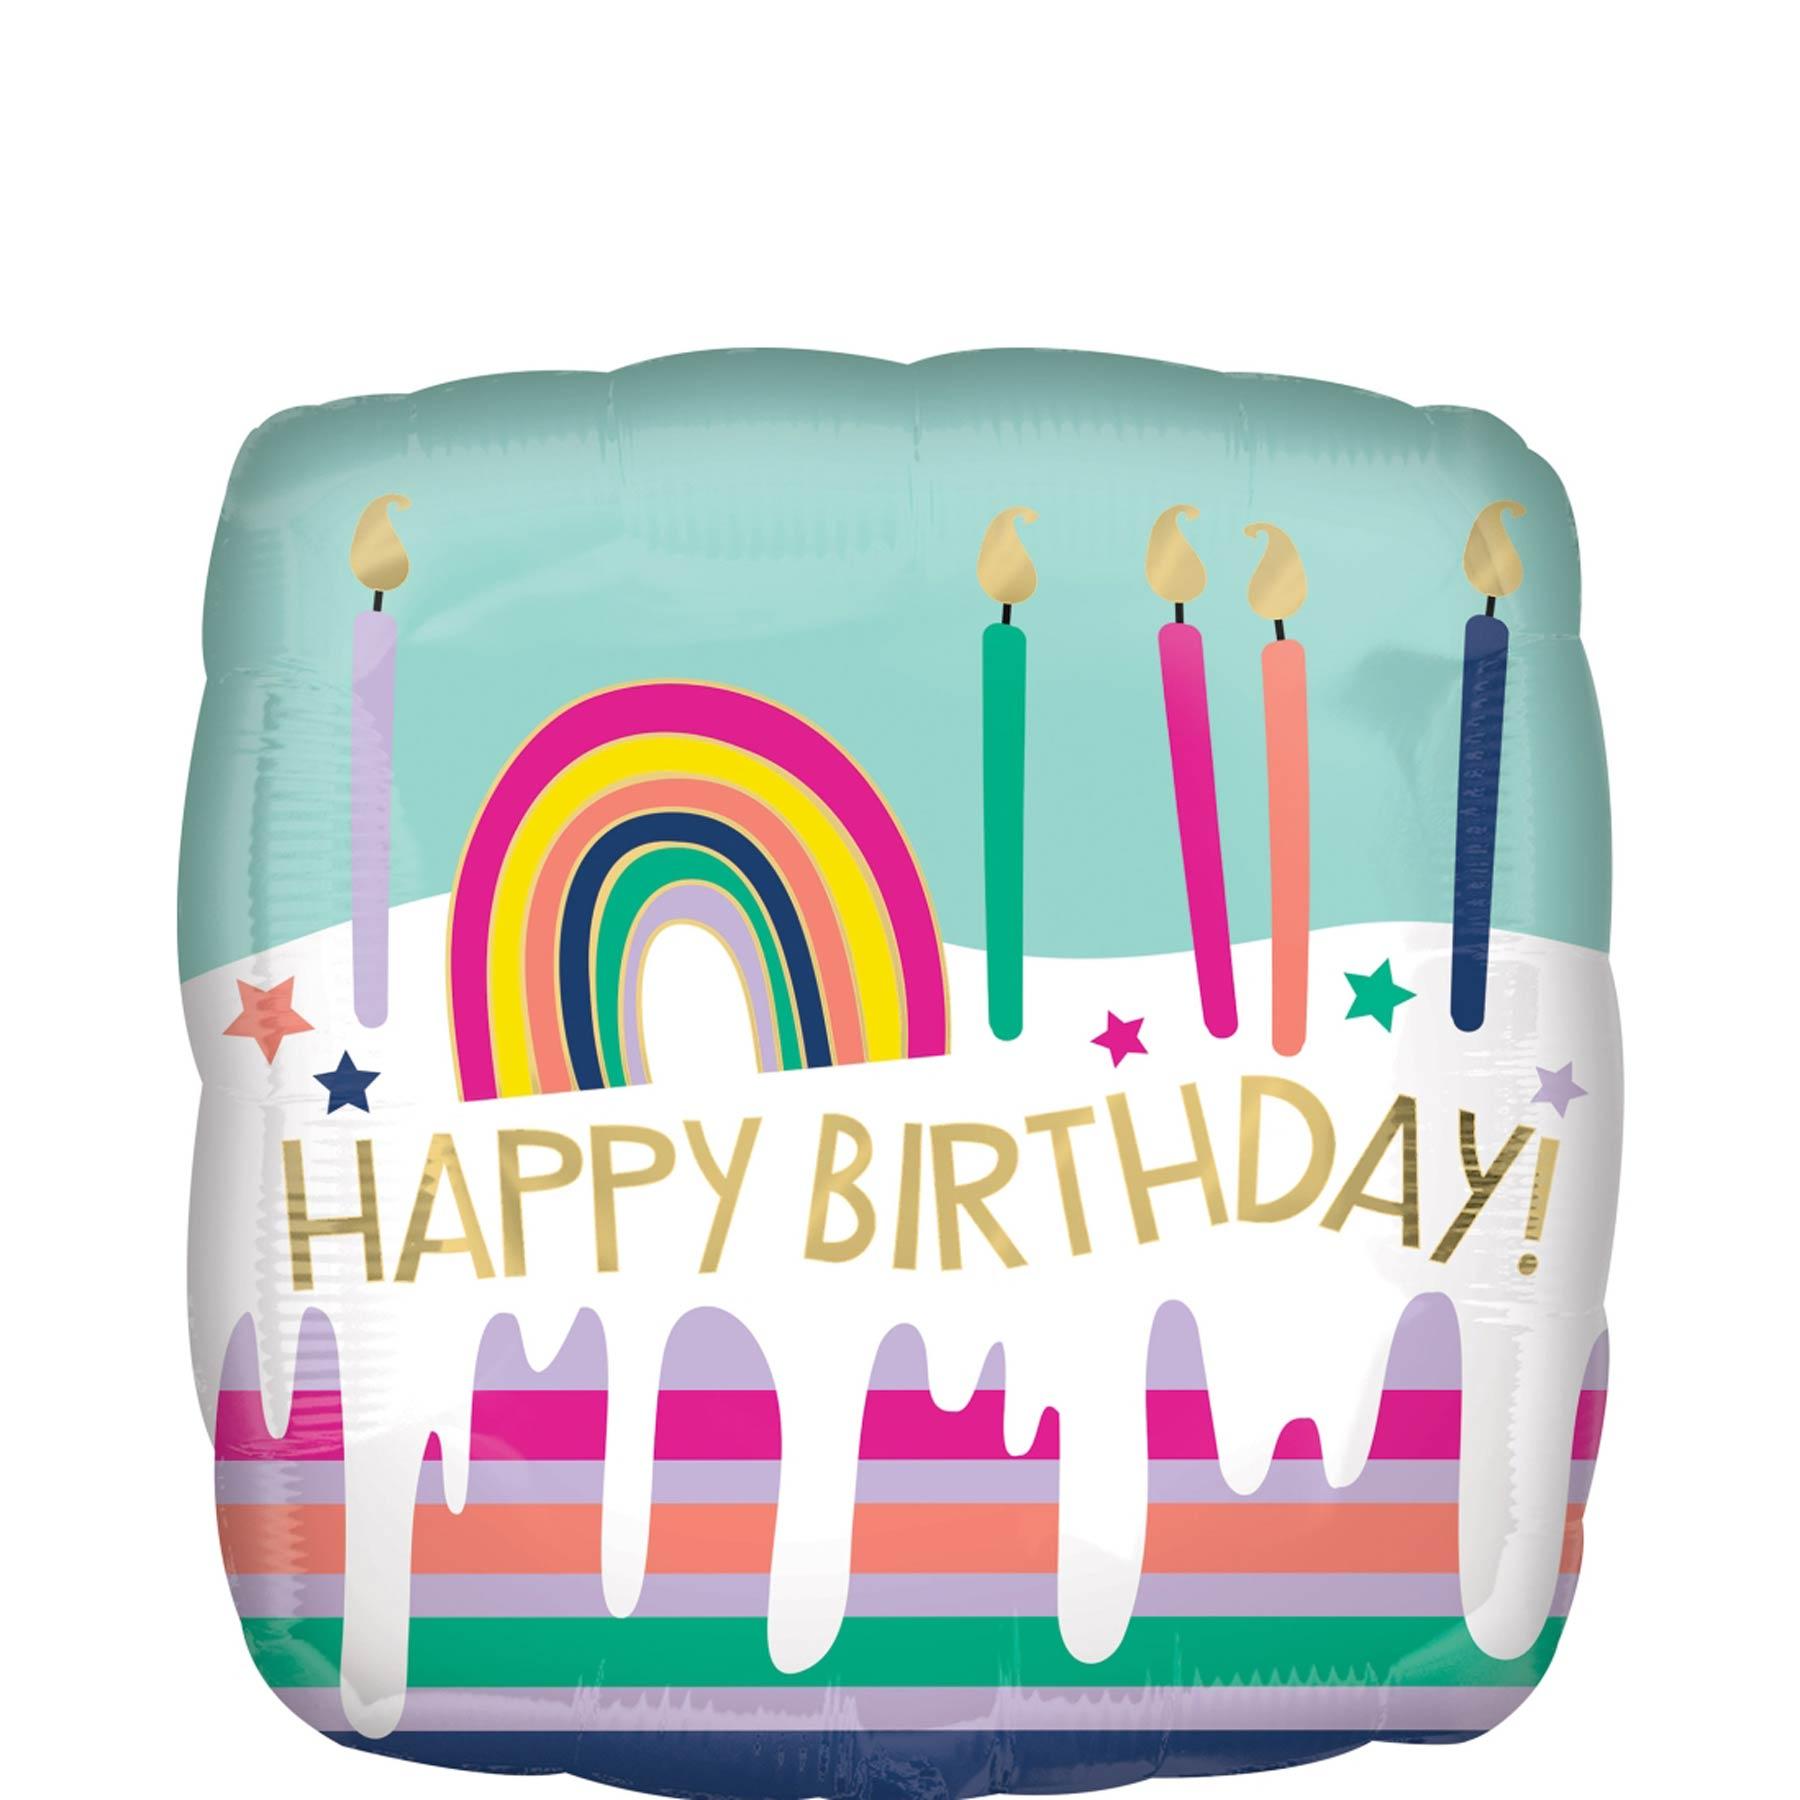 Happy Birthday Frosted Striped Cake Balloon 45cm Balloons & Streamers - Party Centre